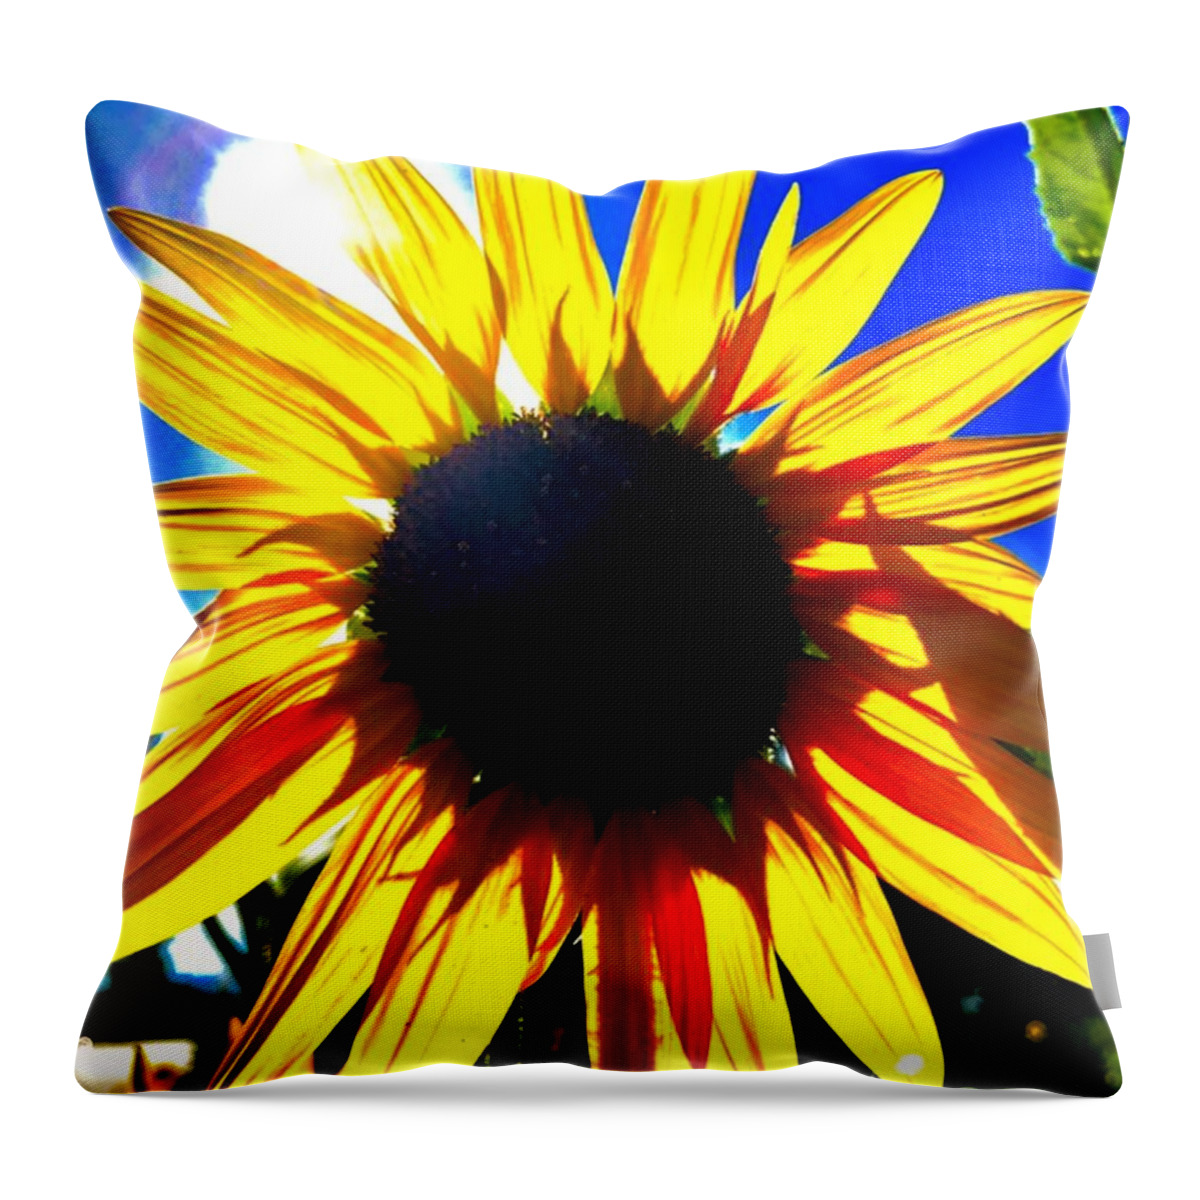 Sunflower Throw Pillow featuring the photograph Glowing Sunflower by Jim DeLillo